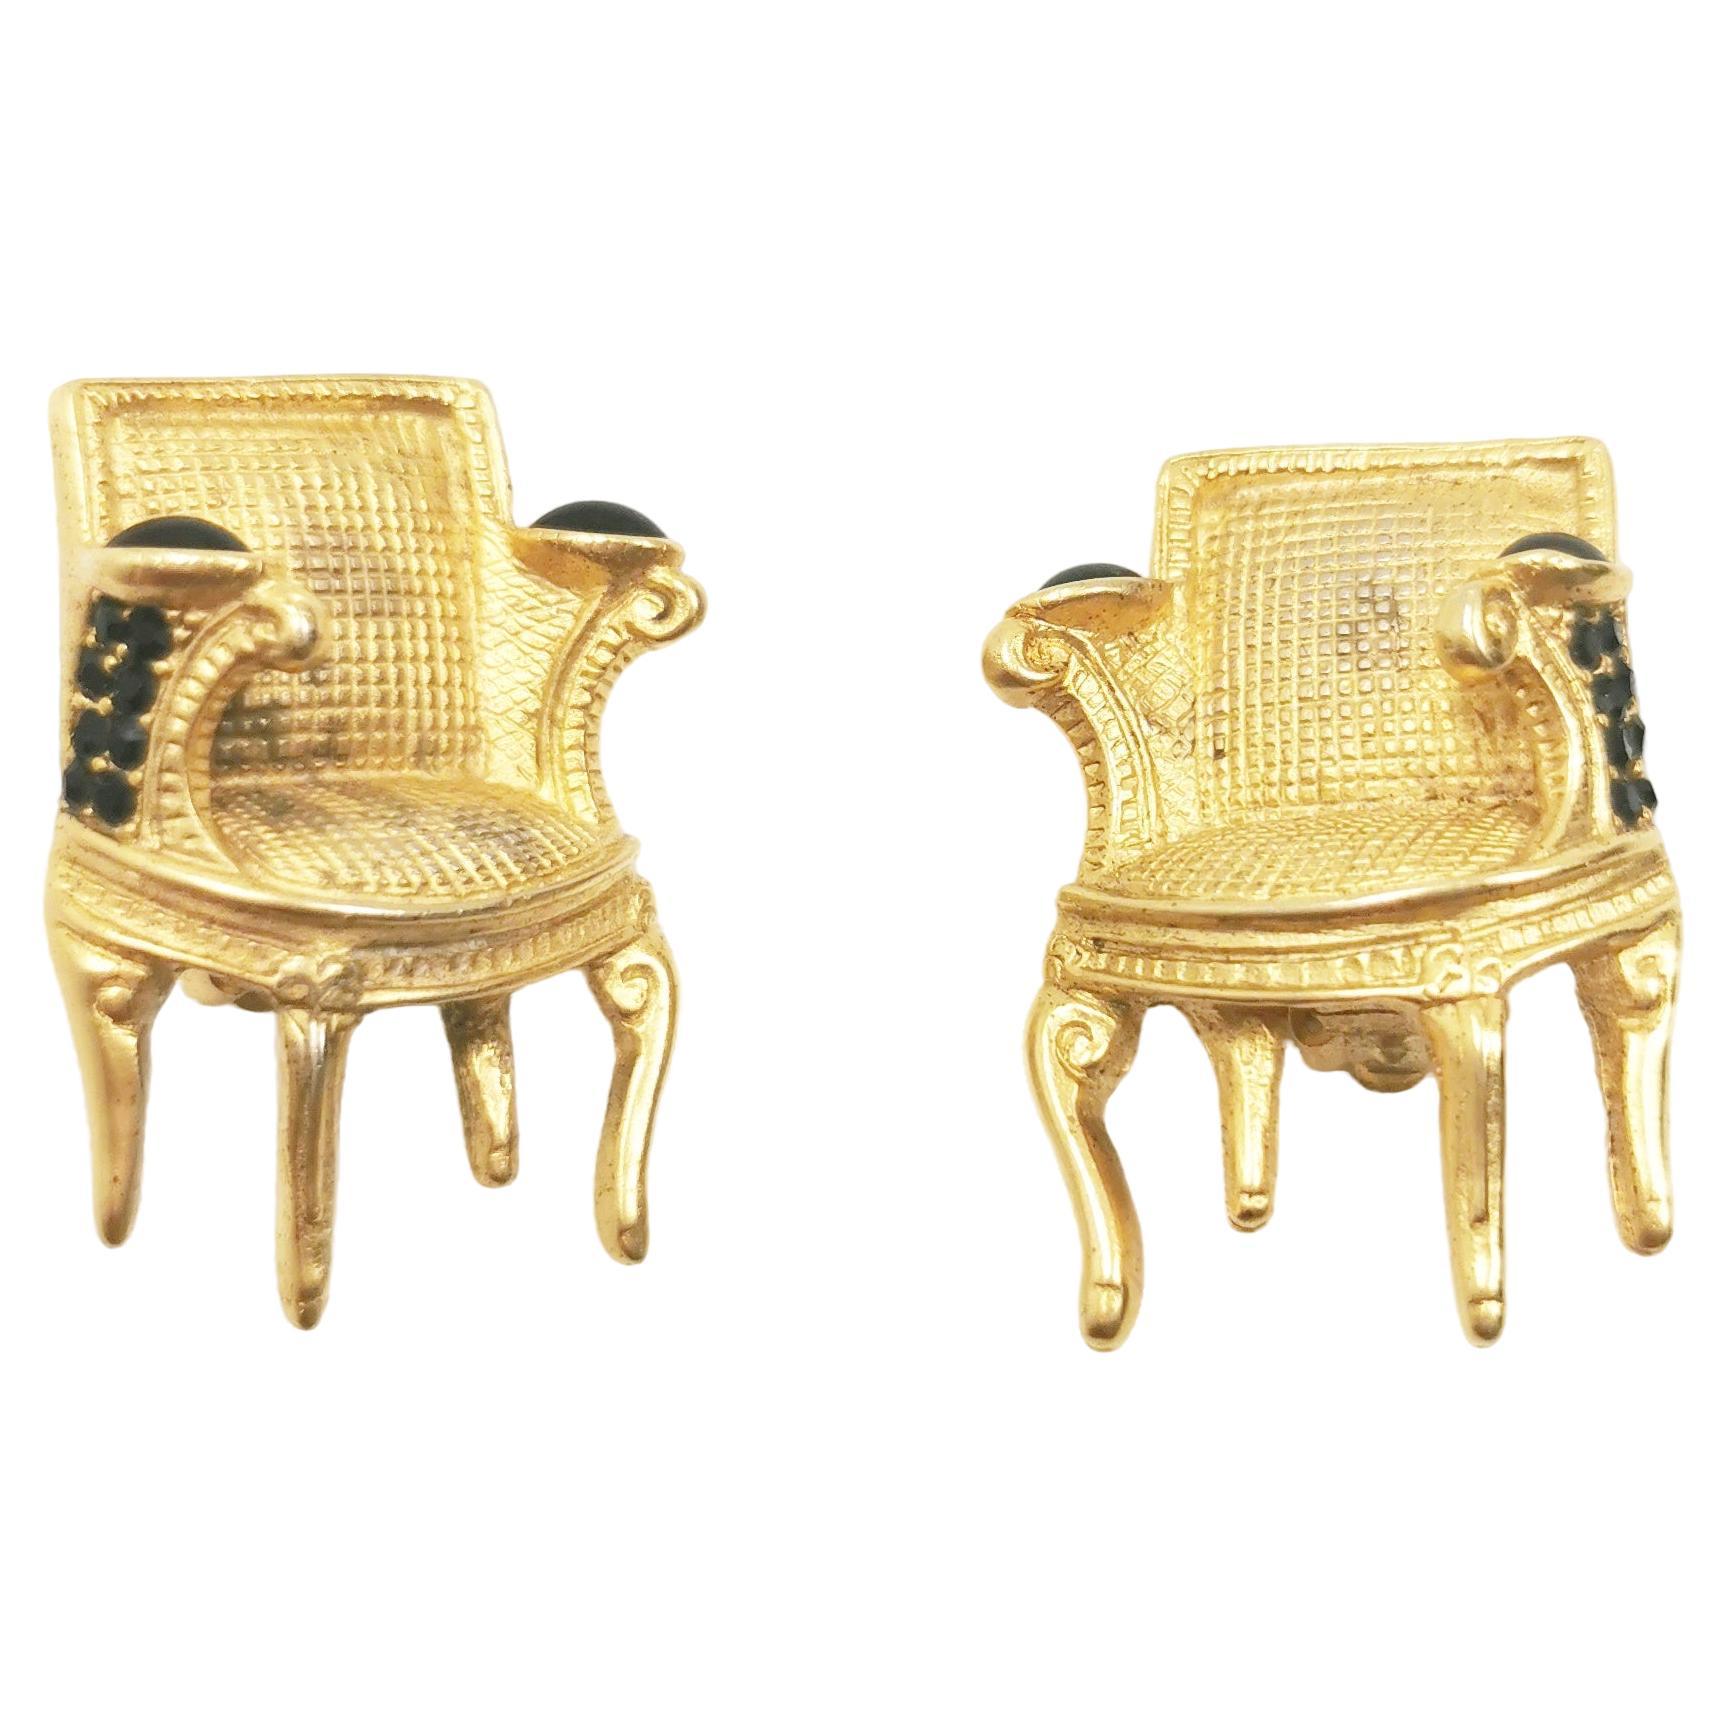 Gilded Bergère Chairs ROCOCO LOUIS XVI GOLD Chair Earrings by Karl Lagerfeld For Sale